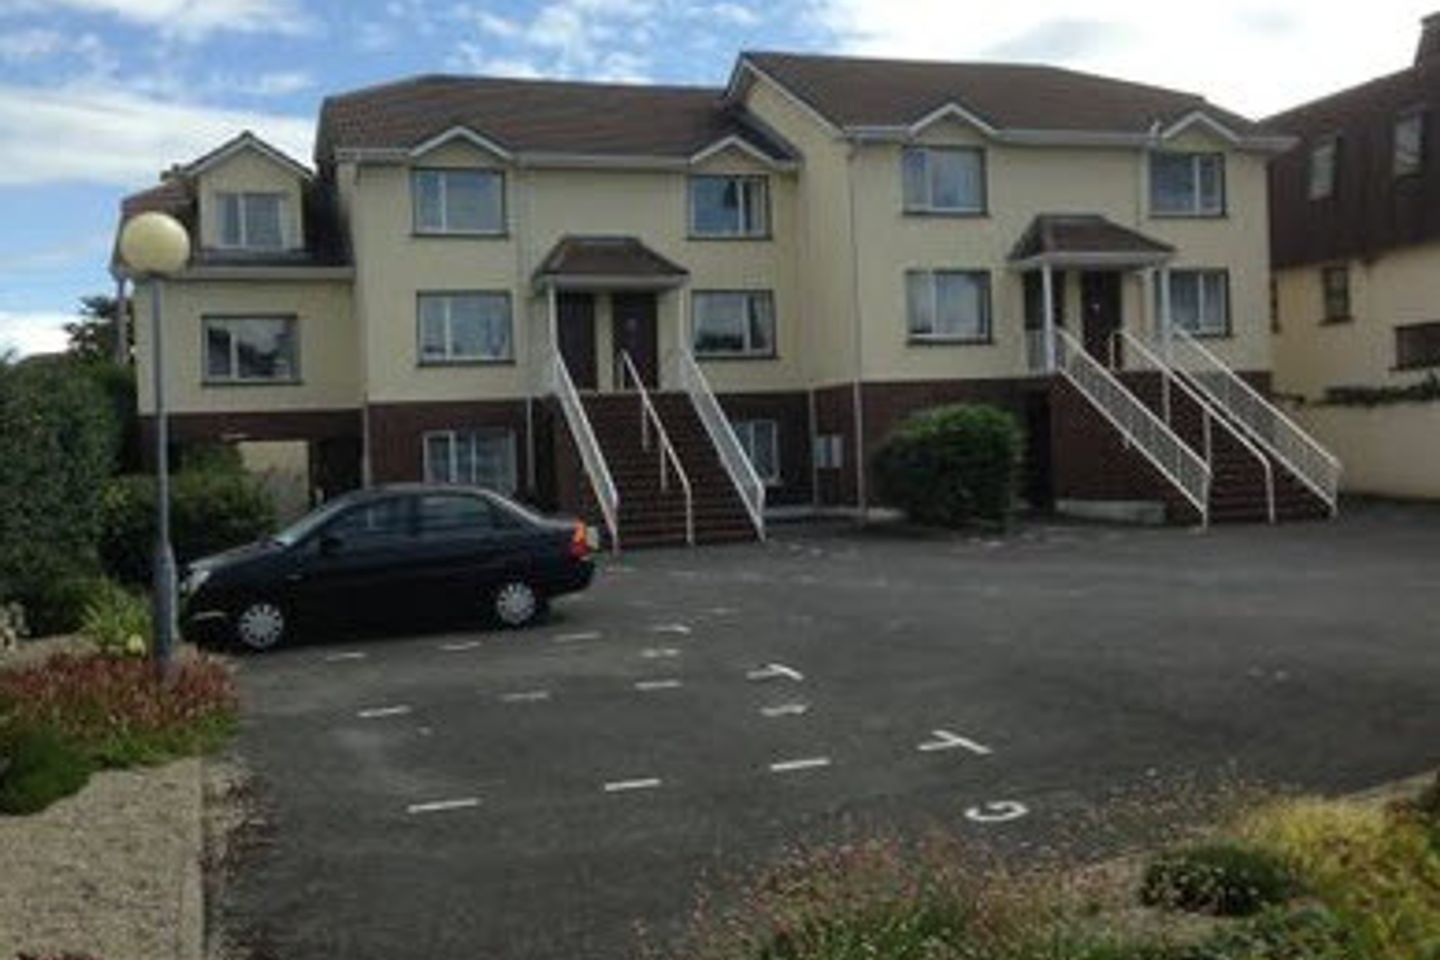 Apartment 1, Carragh Court, Salthill, Co. Galway, H91XRH1